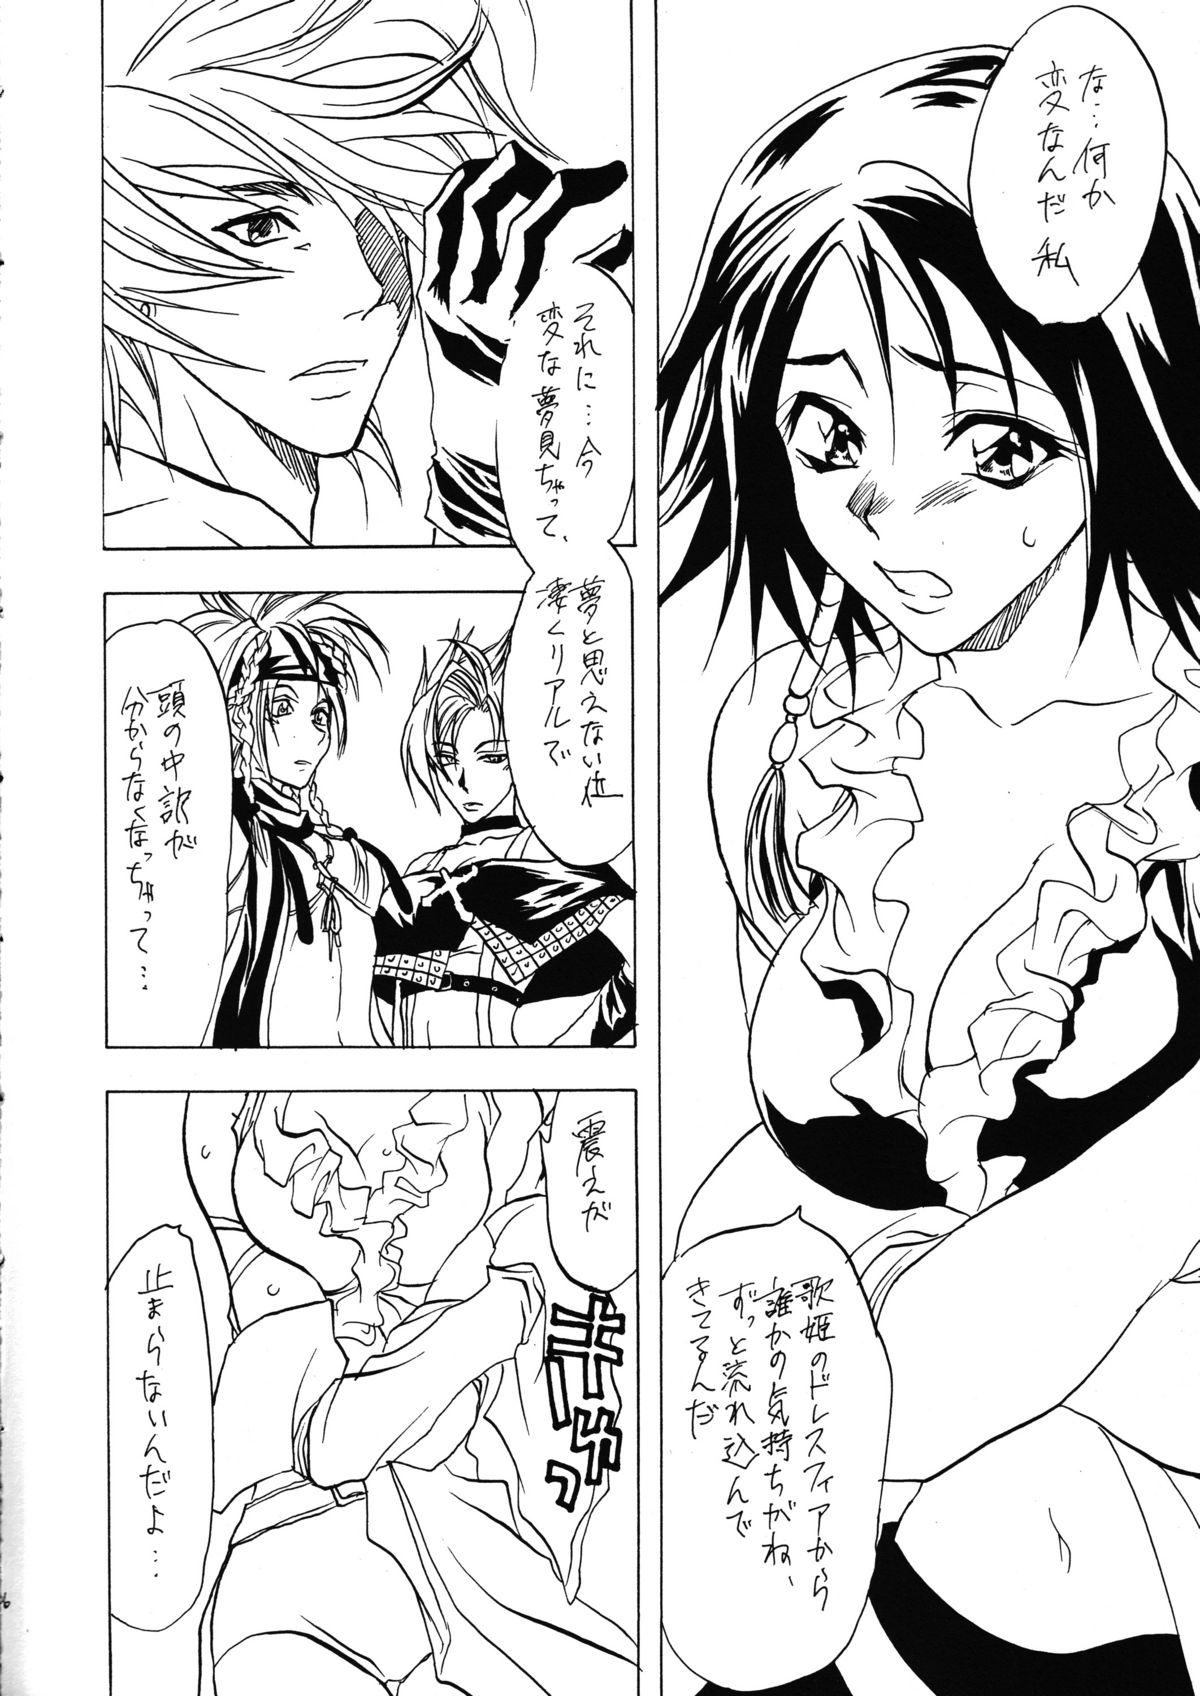 Whipping Sennen No Koi 2 - Final fantasy x-2 Hot Girl Pussy - Page 7